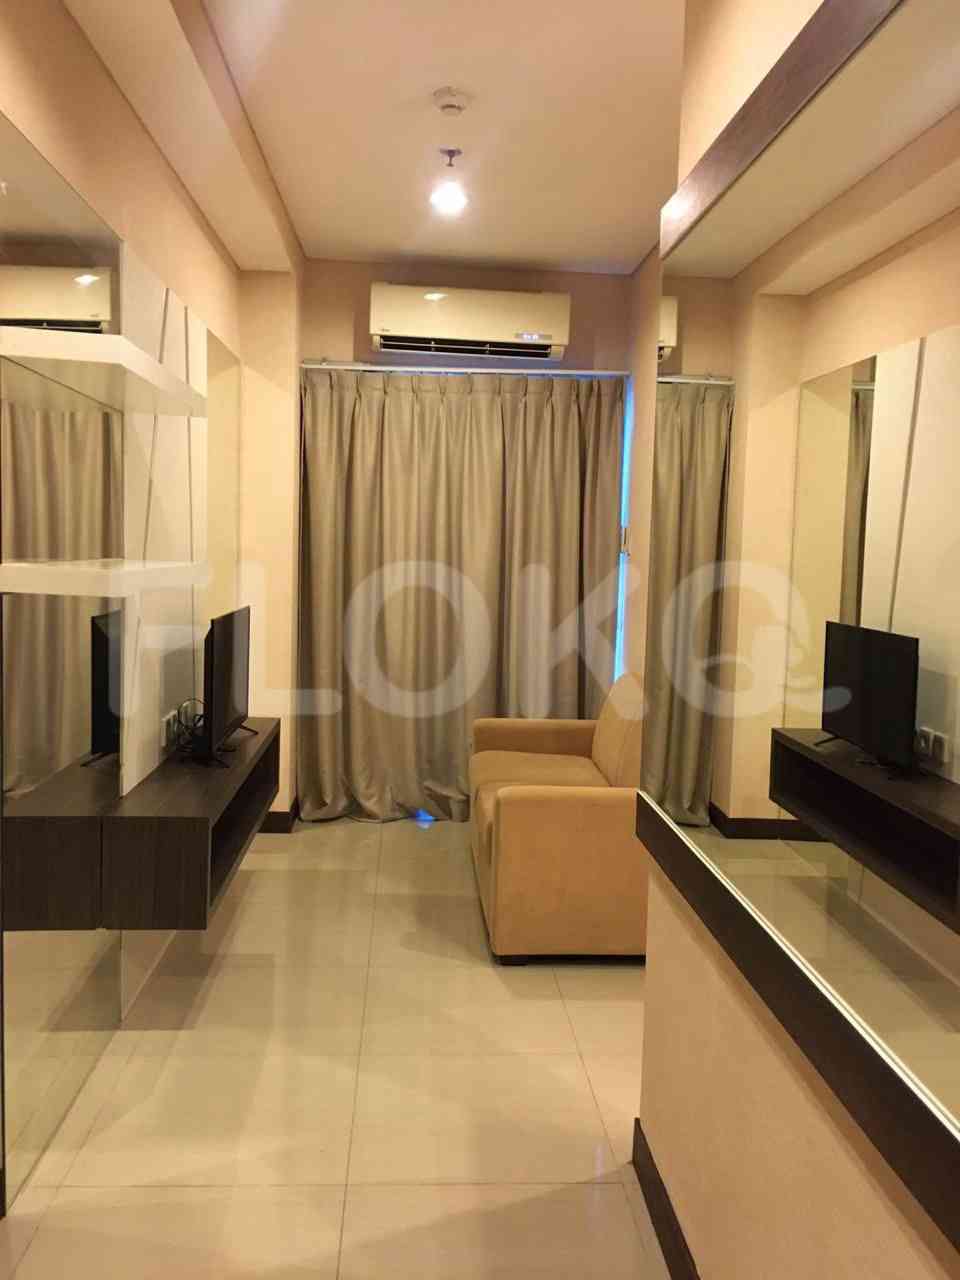 2 Bedroom on 19th Floor for Rent in GP Plaza Apartment - ftaef4 1